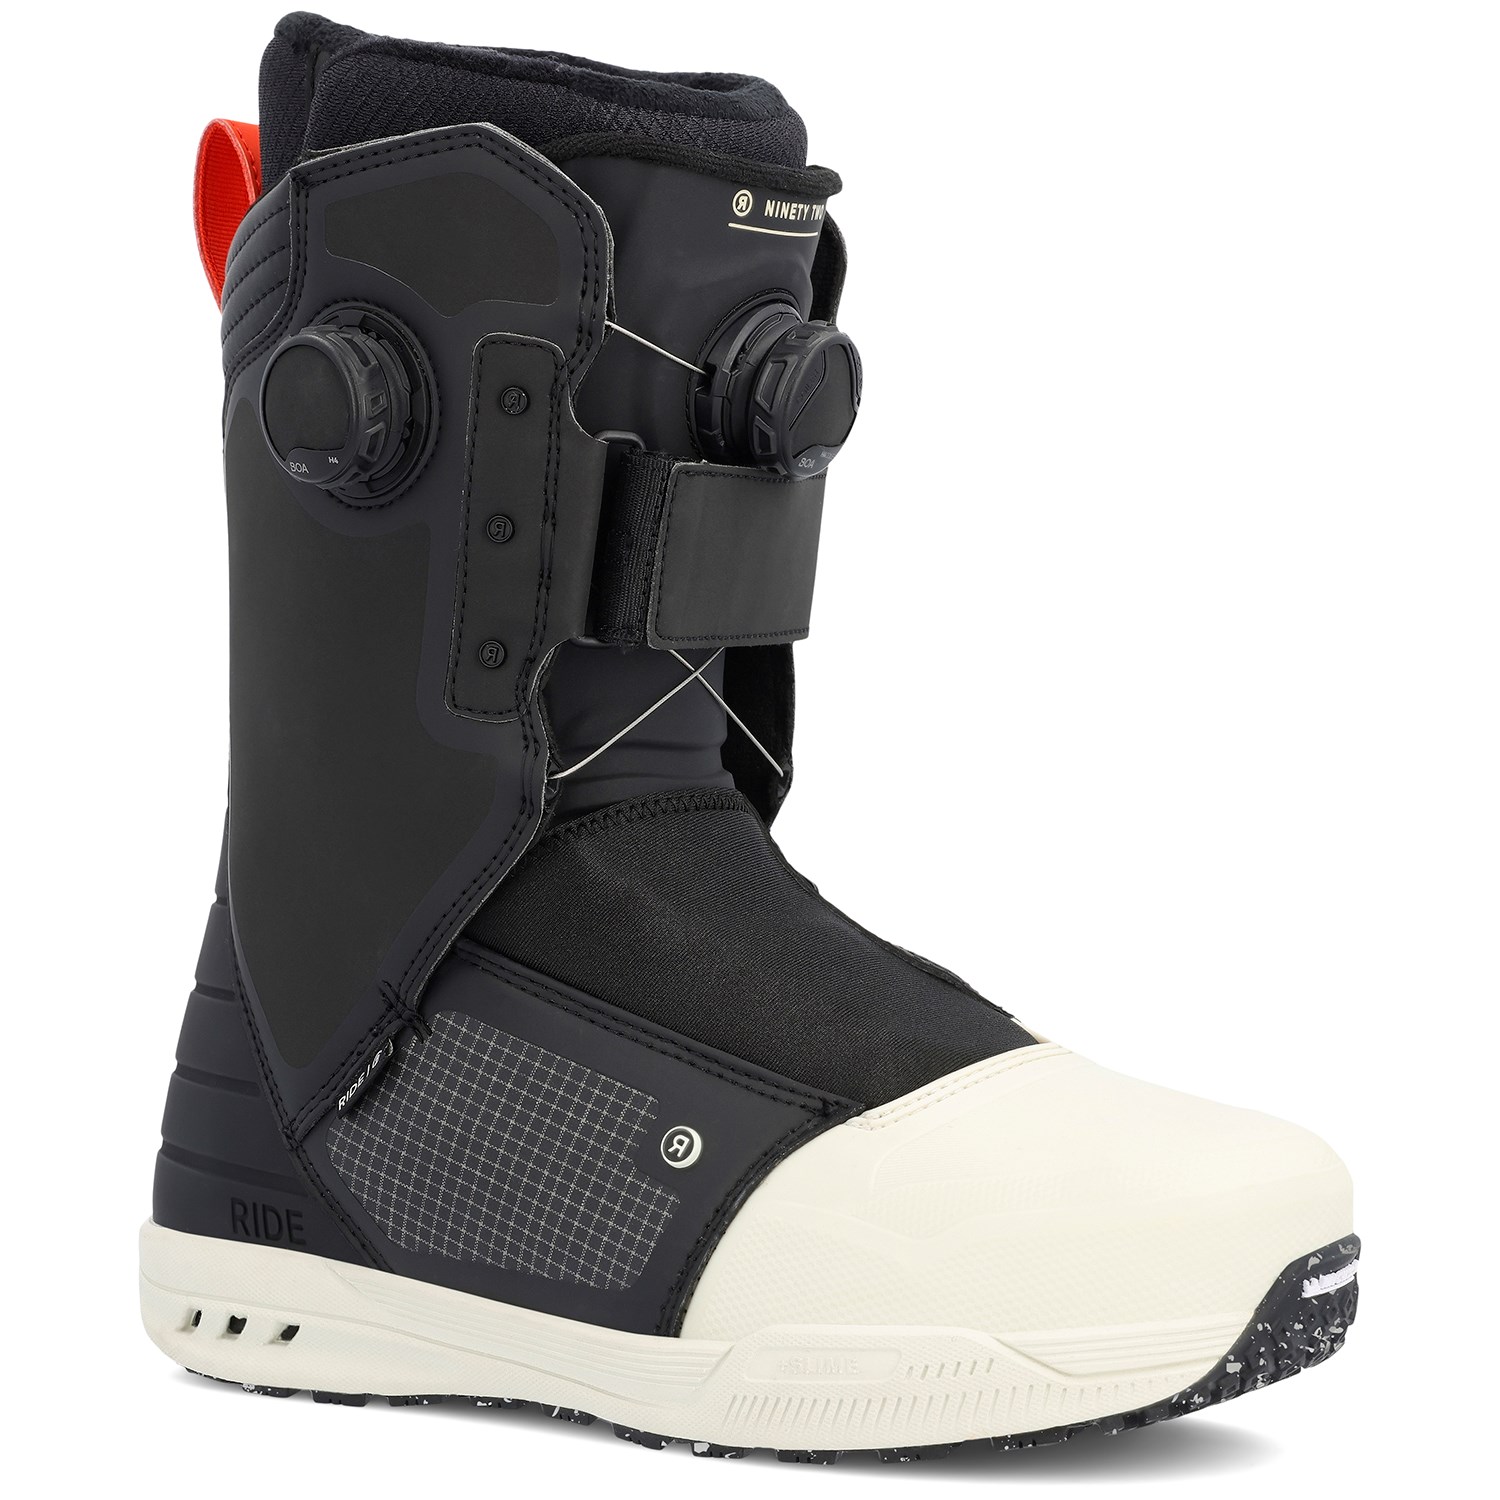 residentie pantoffel Afleiding Ride The 92 Snowboard Boots 2023 | evo